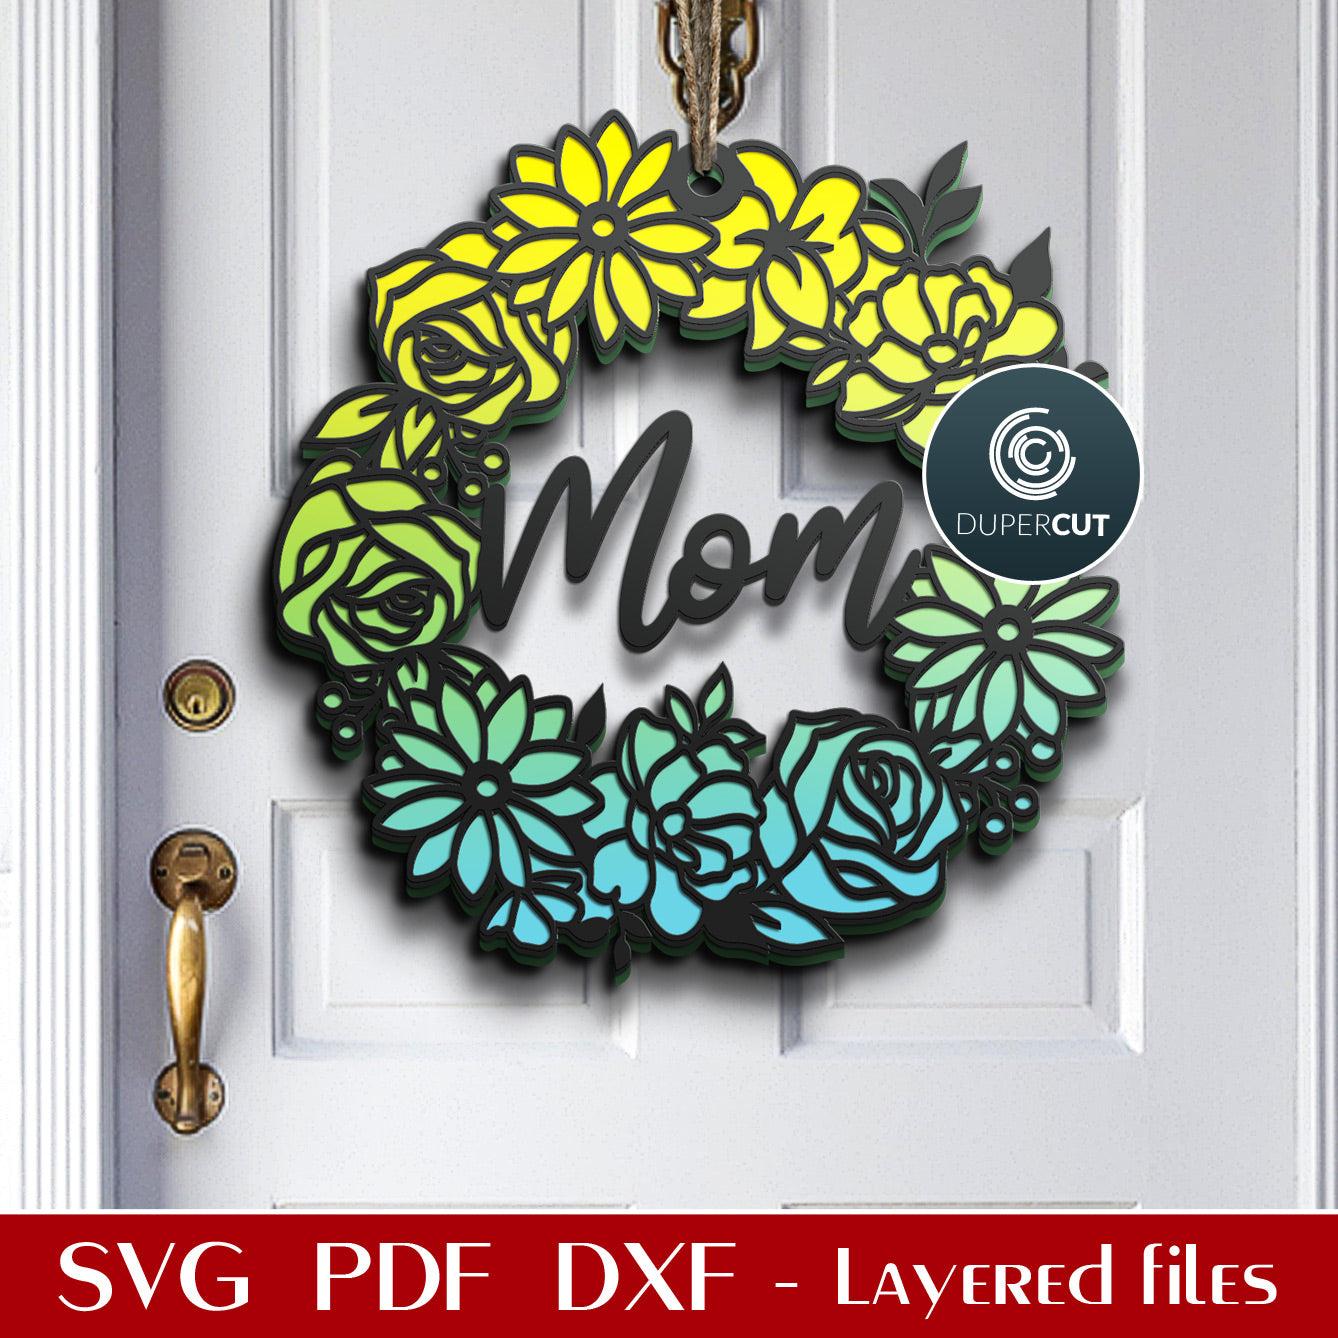 Mother's Day DIY gift floral wreath - SVG DXF layered cutting files for Glowforge, Cricut, Silhouette, CNC plasma machines, scroll saw pattern by www.DuperCut.com 